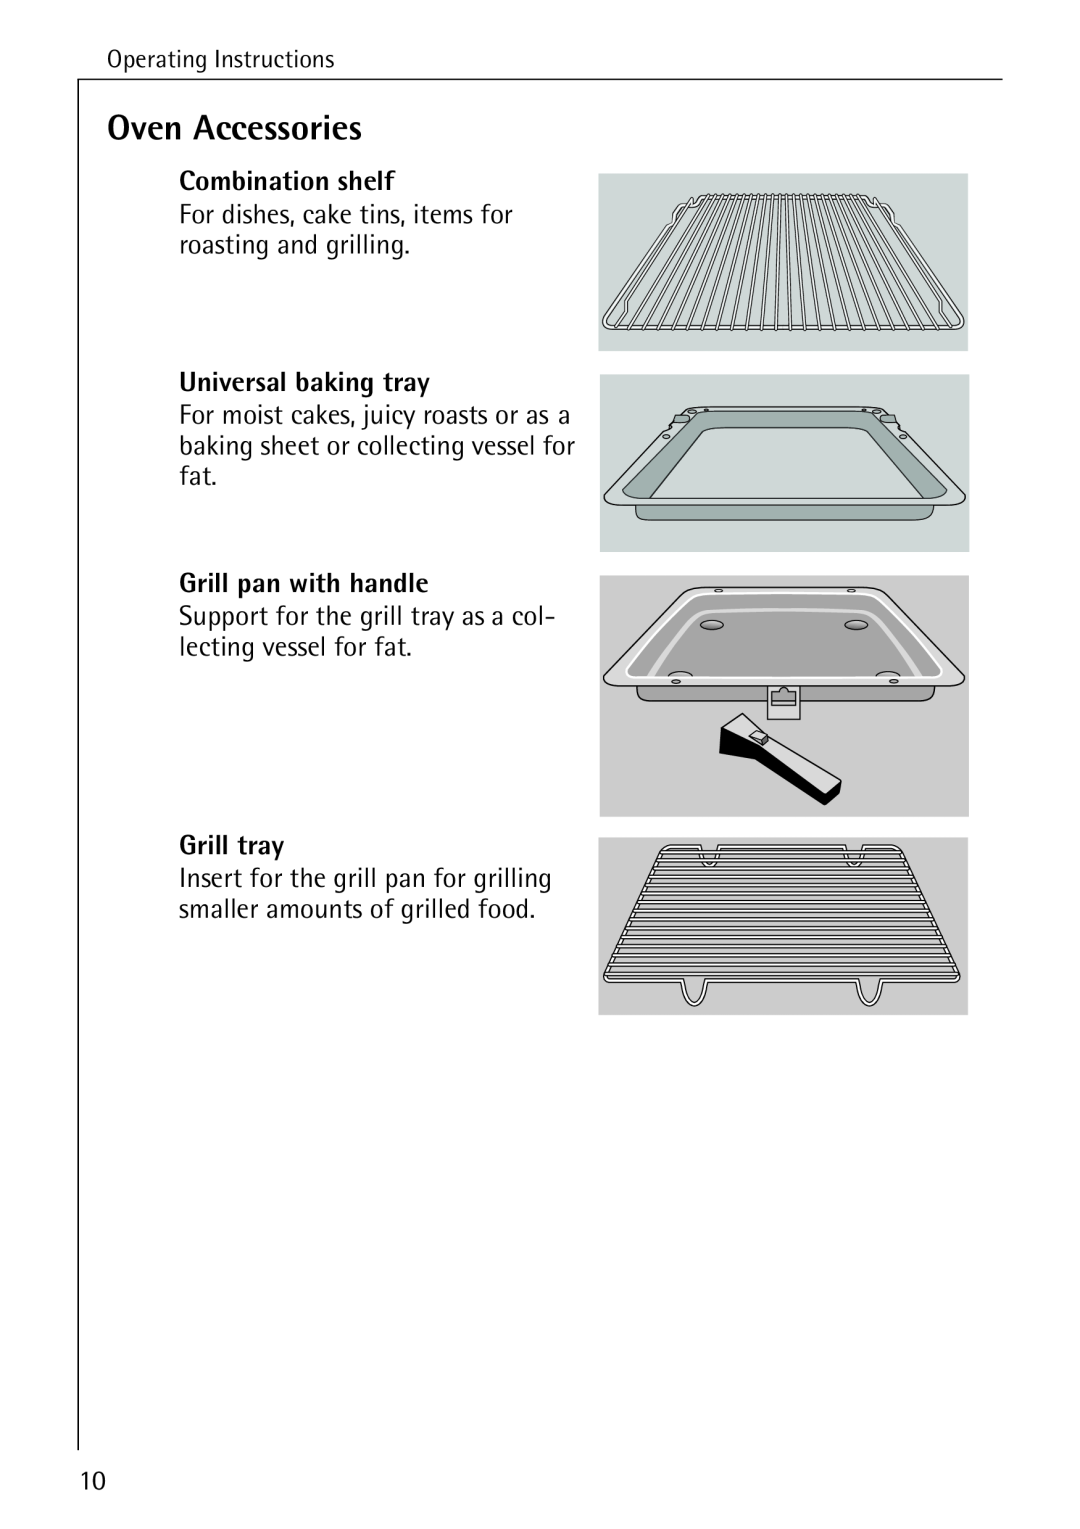 Electrolux B2190-1 manual Oven Accessories, Combination shelf, Universal baking tray, Grill pan with handle, Grill tray 